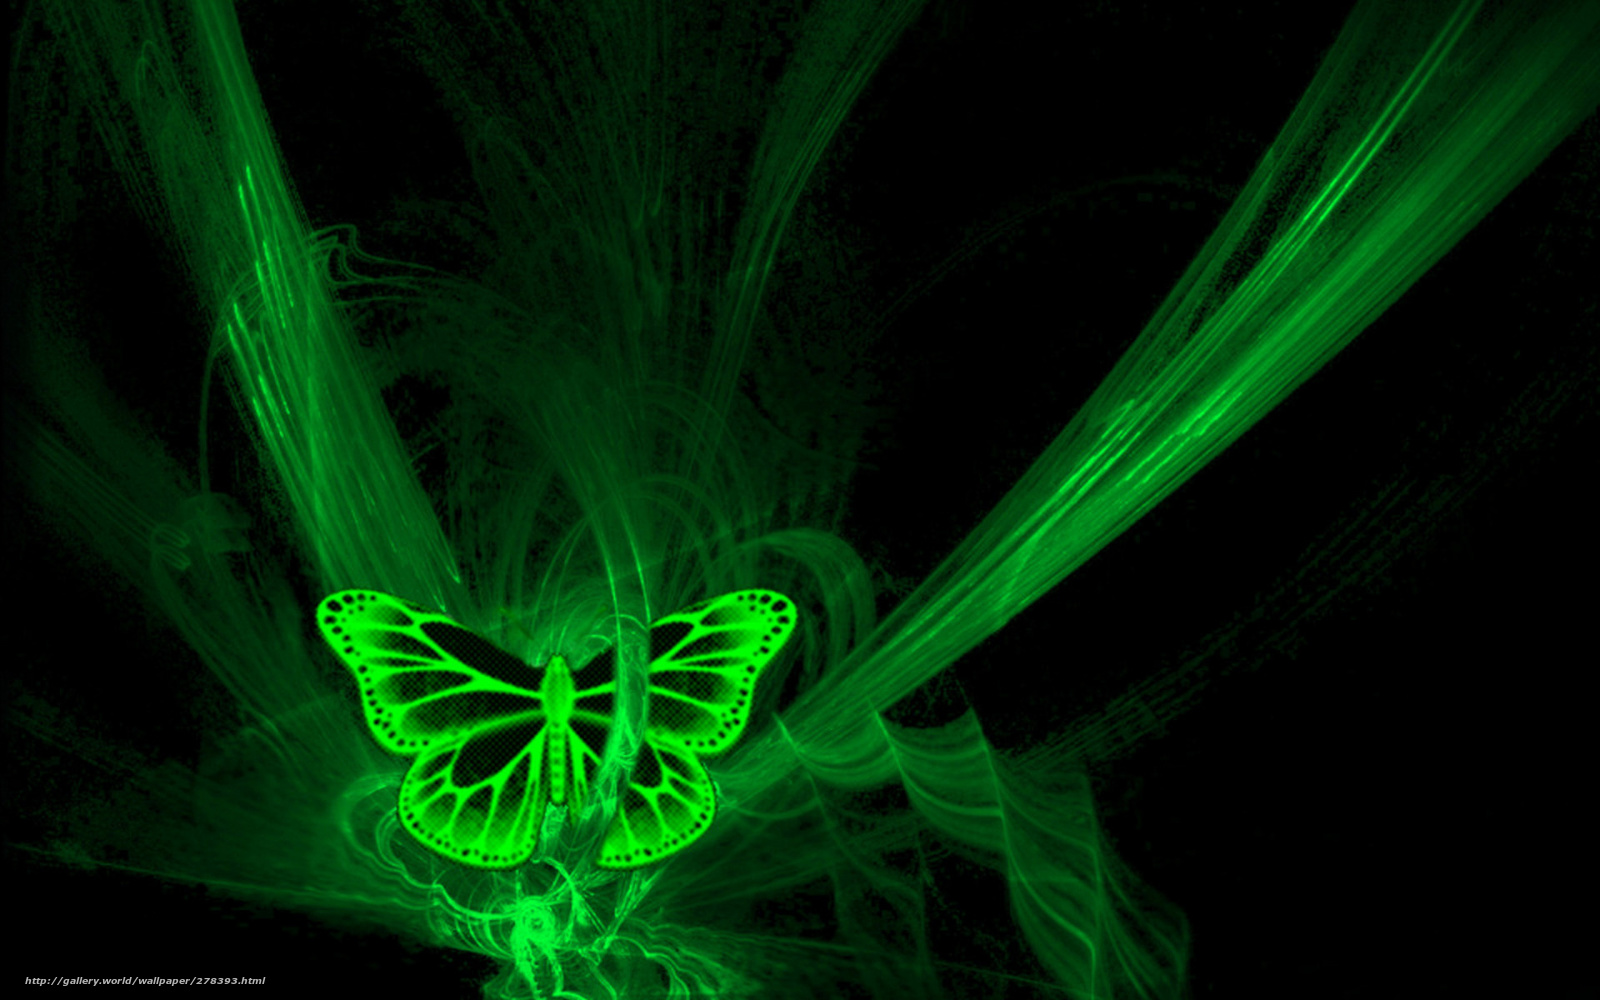 Green Neon Wallpaper Images amp Pictures   Becuo